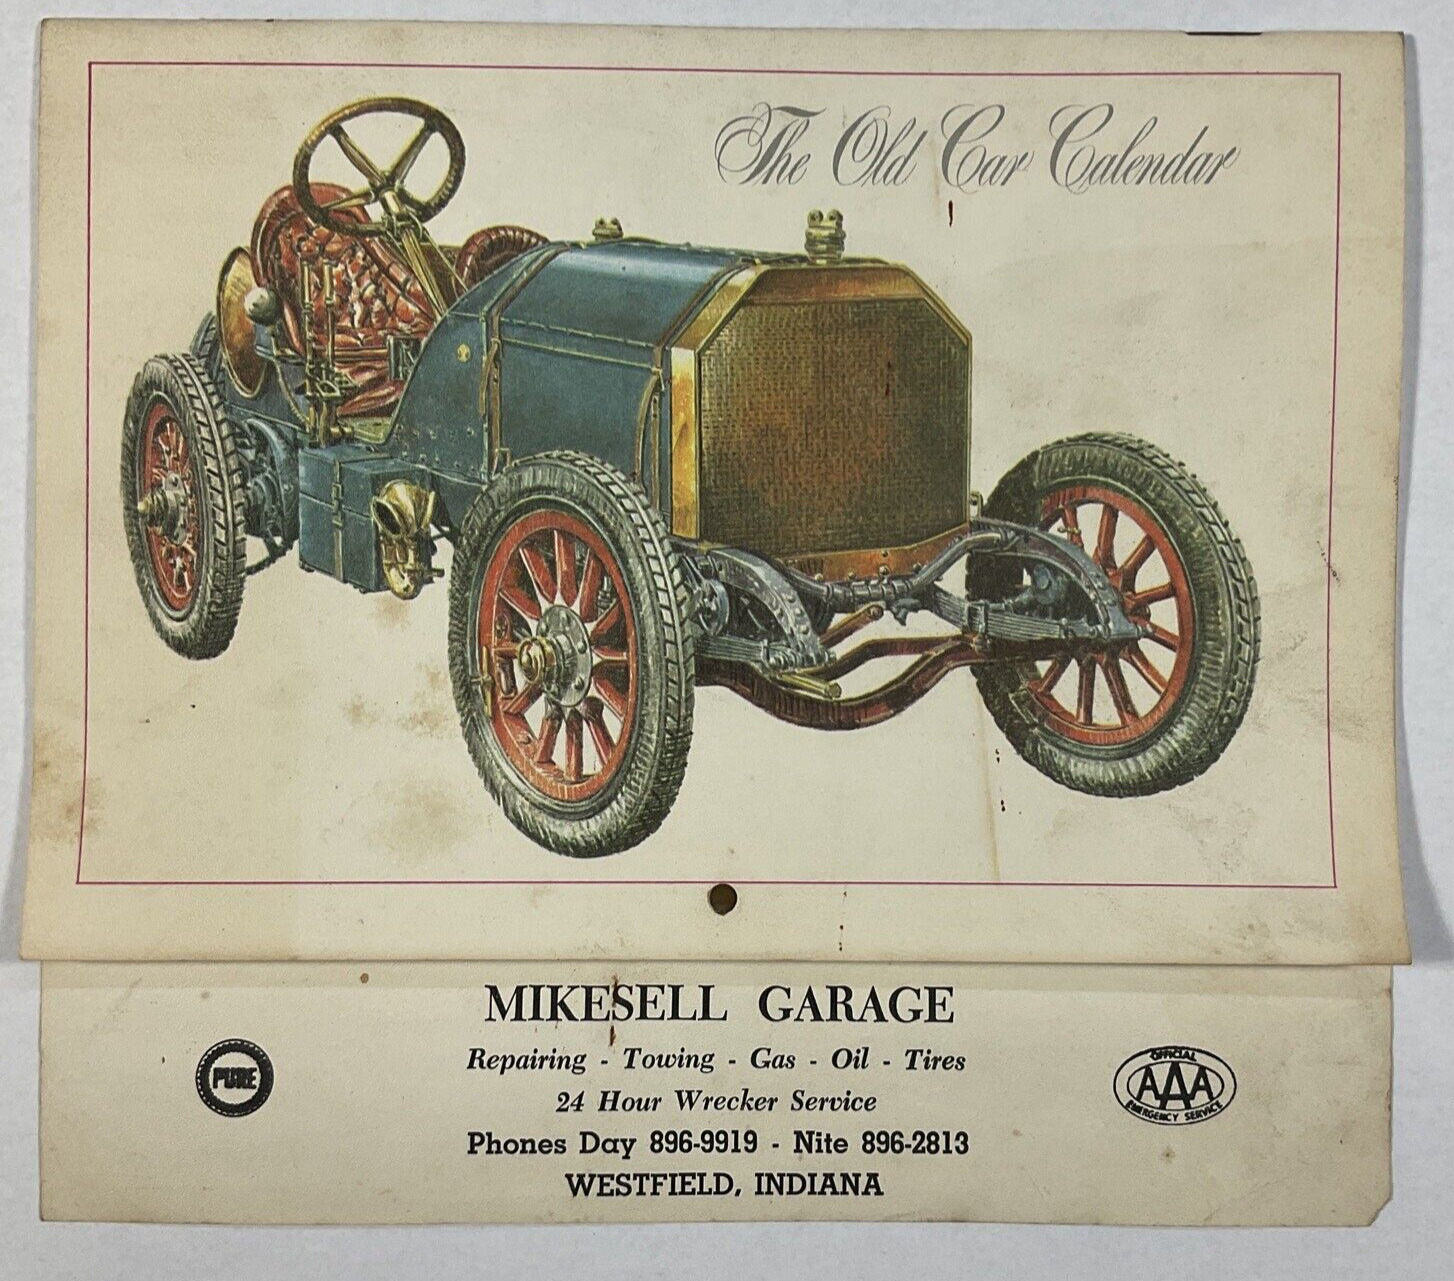 1966 Westfield, Indiana Mikesell Garage Advertising Calendar Old Cars